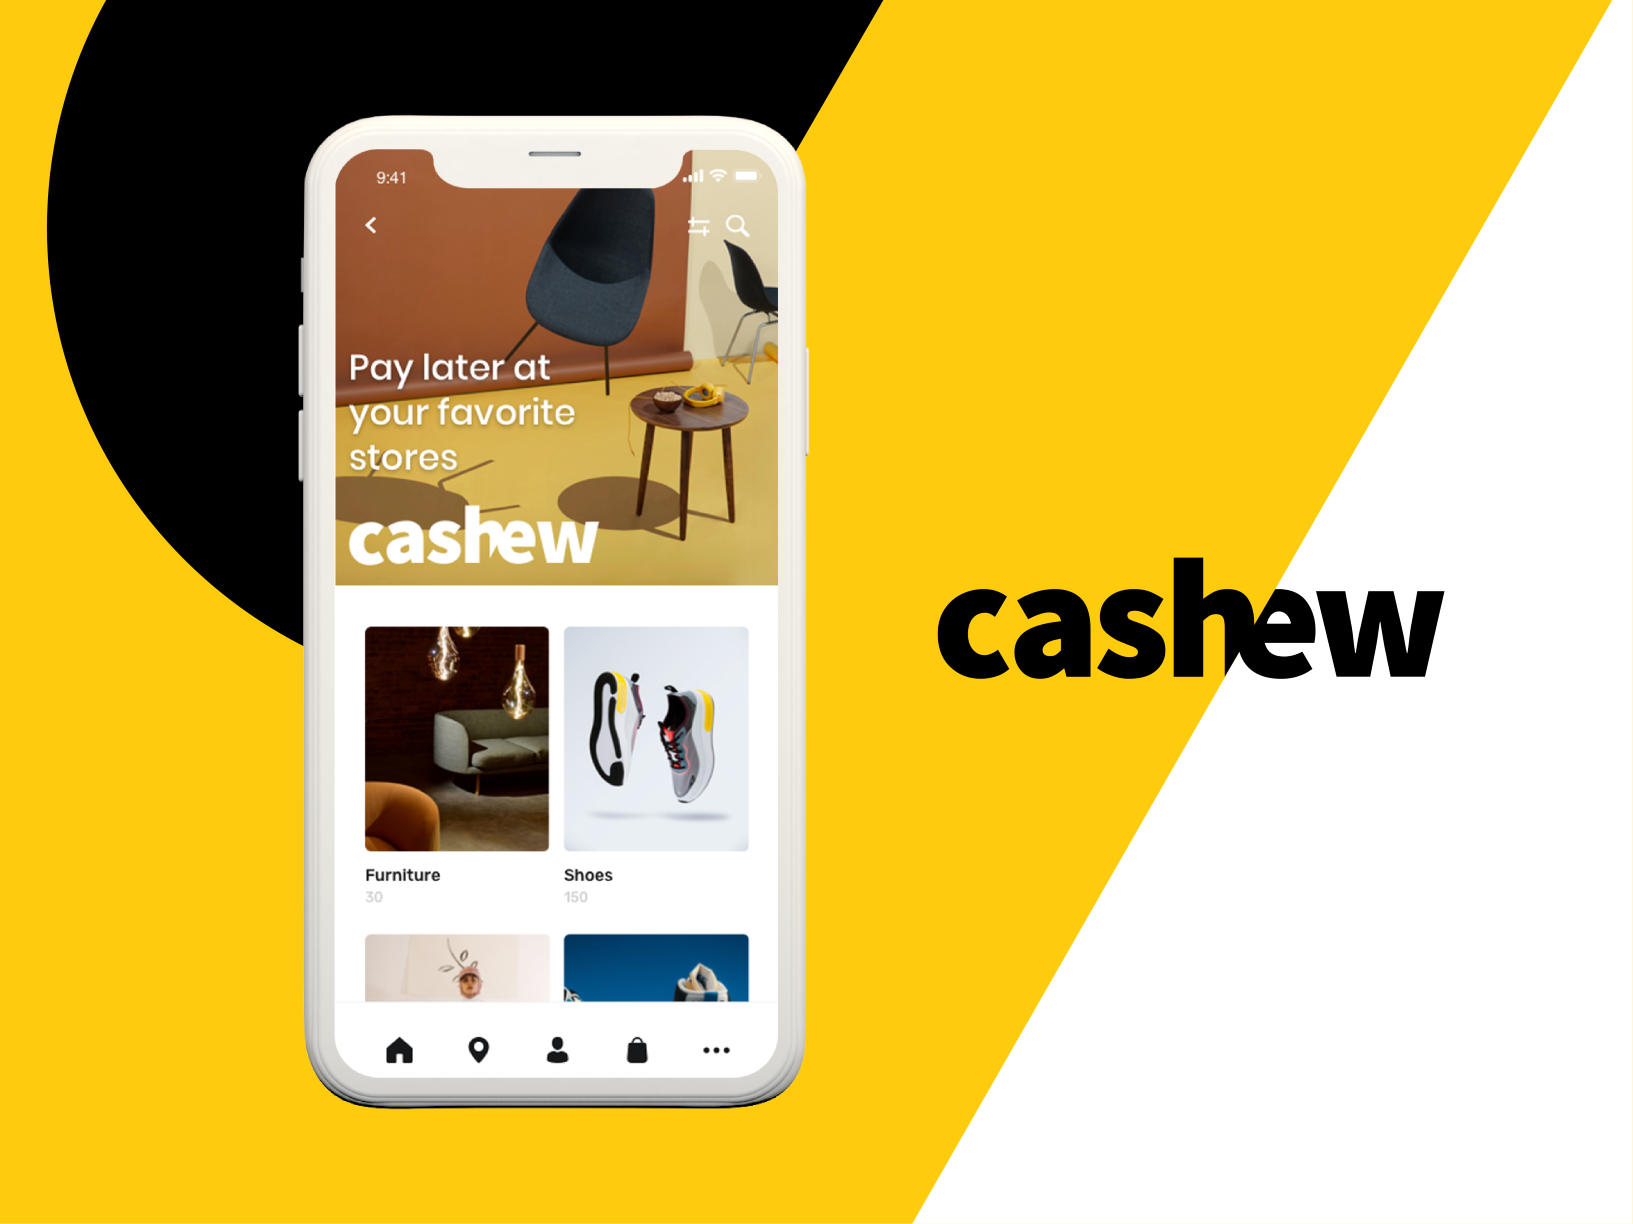 Cashew Becomes Region’s First 360-Degree Instant Payment And Digital Finance Solution As It Launches In UAE & Saudi Arabia Backed By US $5 Million Investment